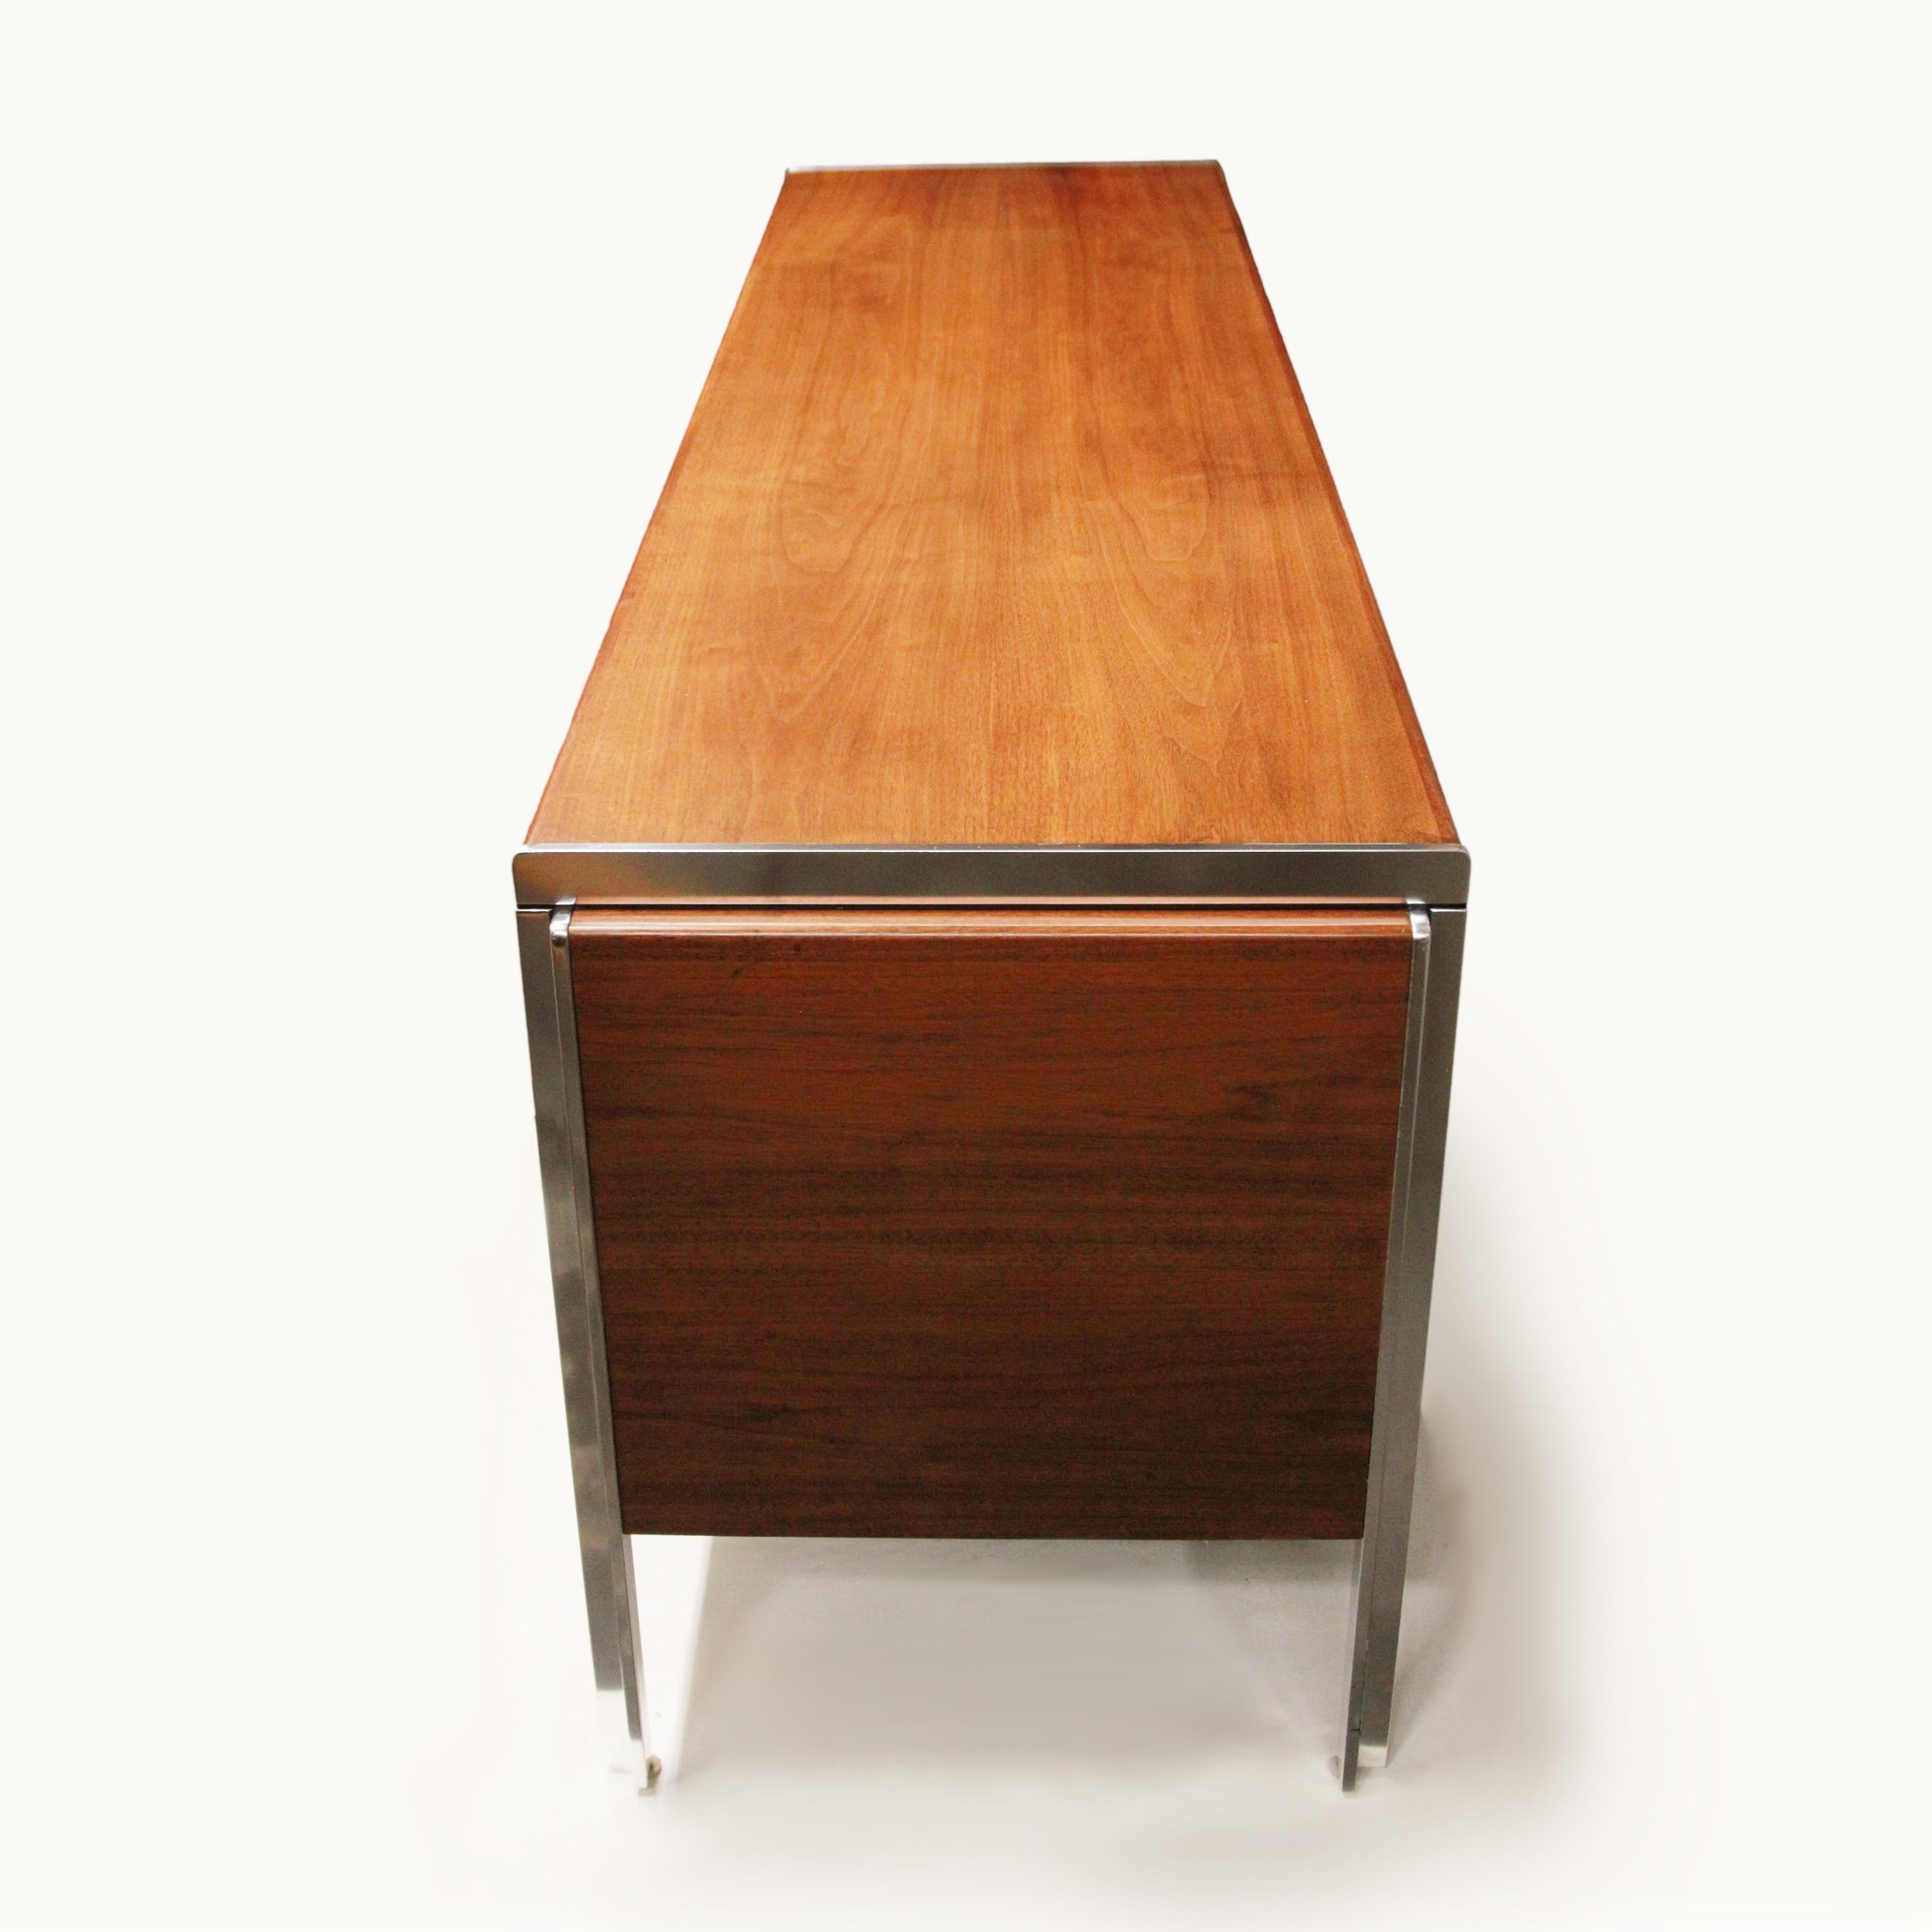 Late 20th Century Mid-Century Modern Walnut & Chrome Credenza by Alexis Yermakov for Stow Davis For Sale